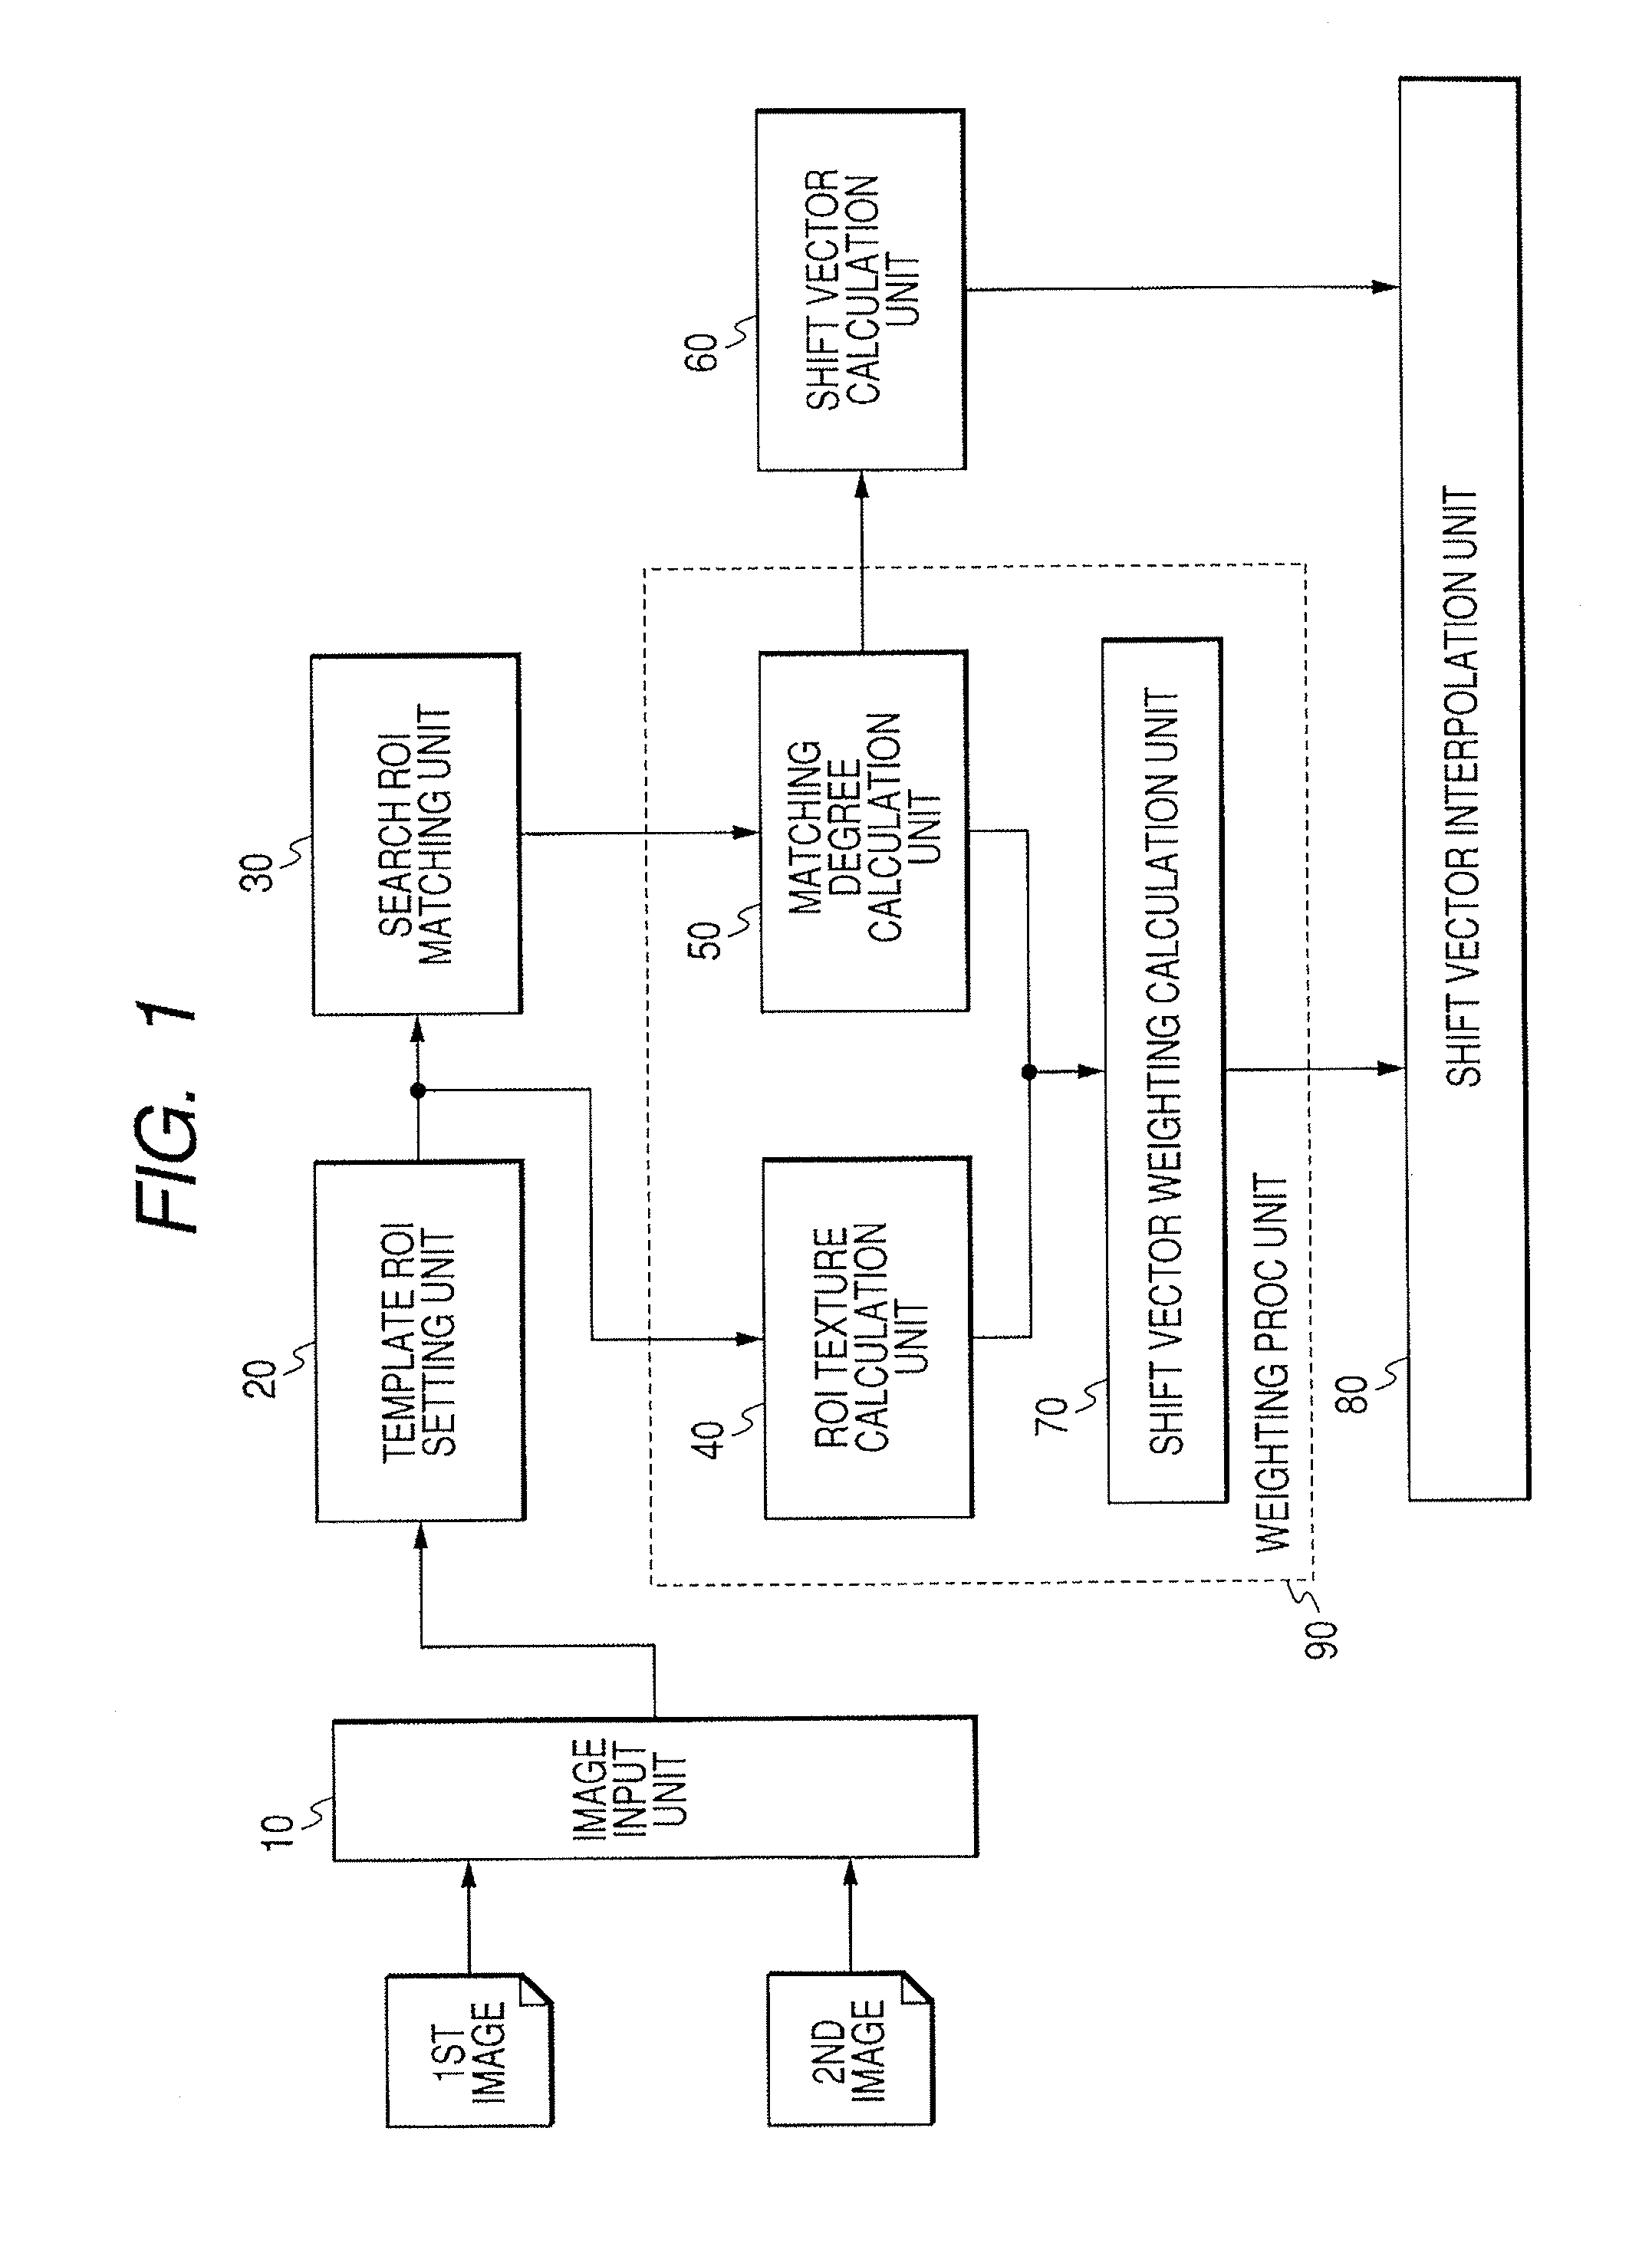 Image processing apparatus and method which match two images based on a shift vector